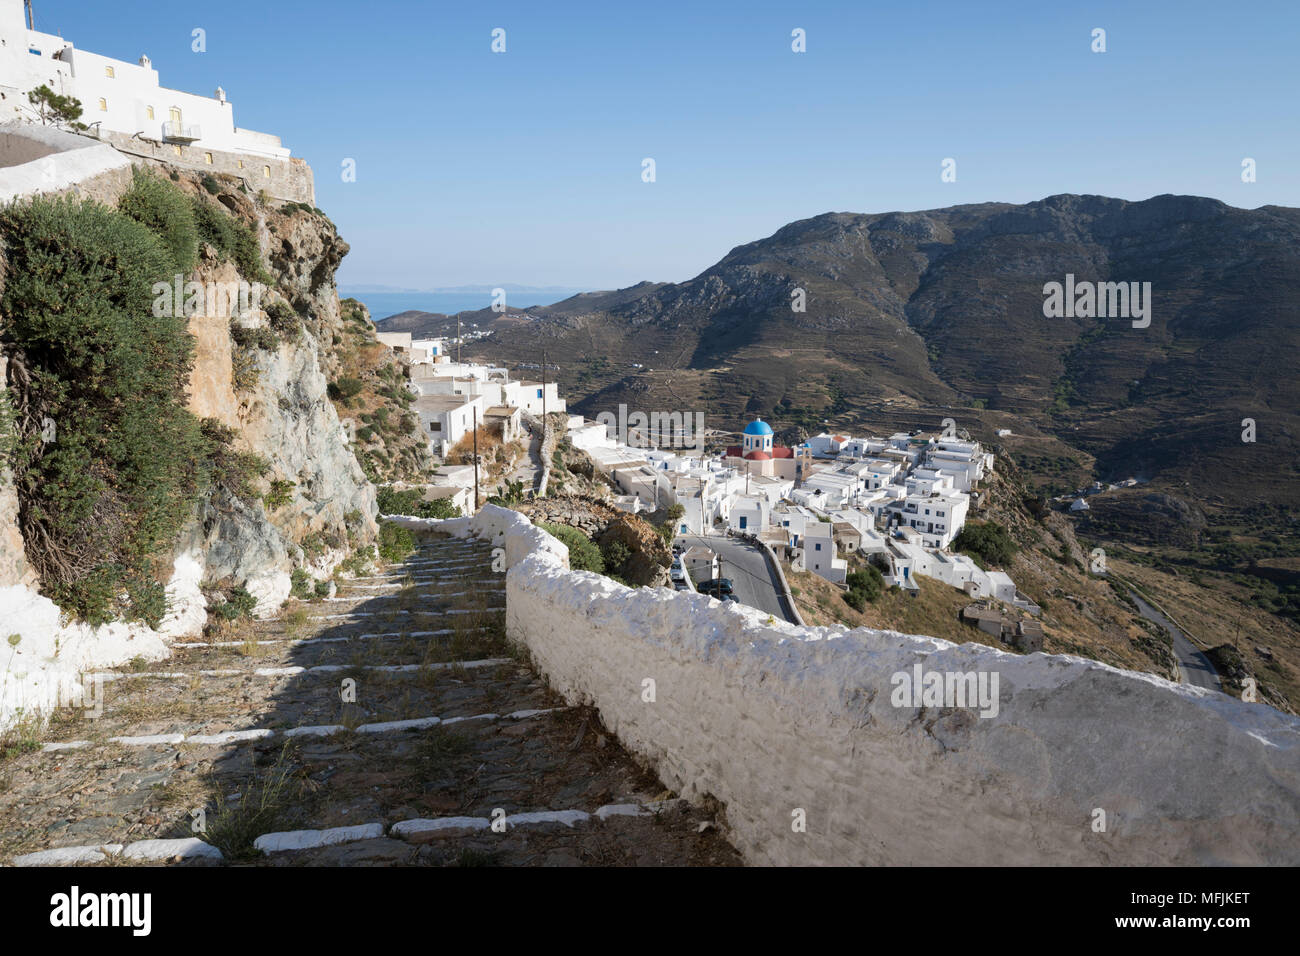 Stone steps and whitewashed houses of mountaintop town of Pano Chora, Serifos, Cyclades, Aegean Sea, Greek Islands, Greece, Europe Stock Photo